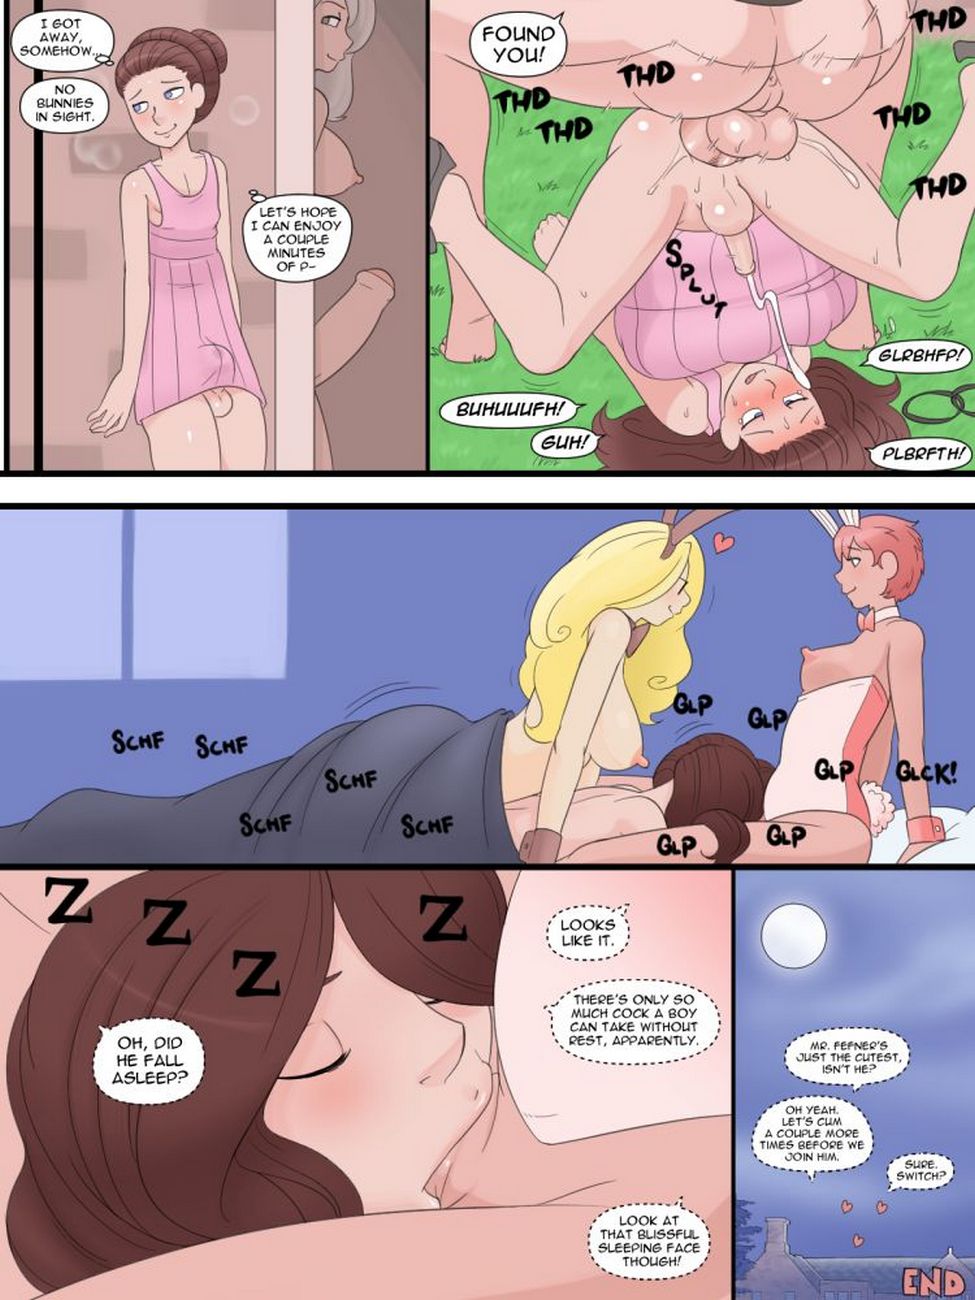 Shemale Daily Life - Daily Life At The Bunny Mansion comic porn â€“ HD Porn Comics